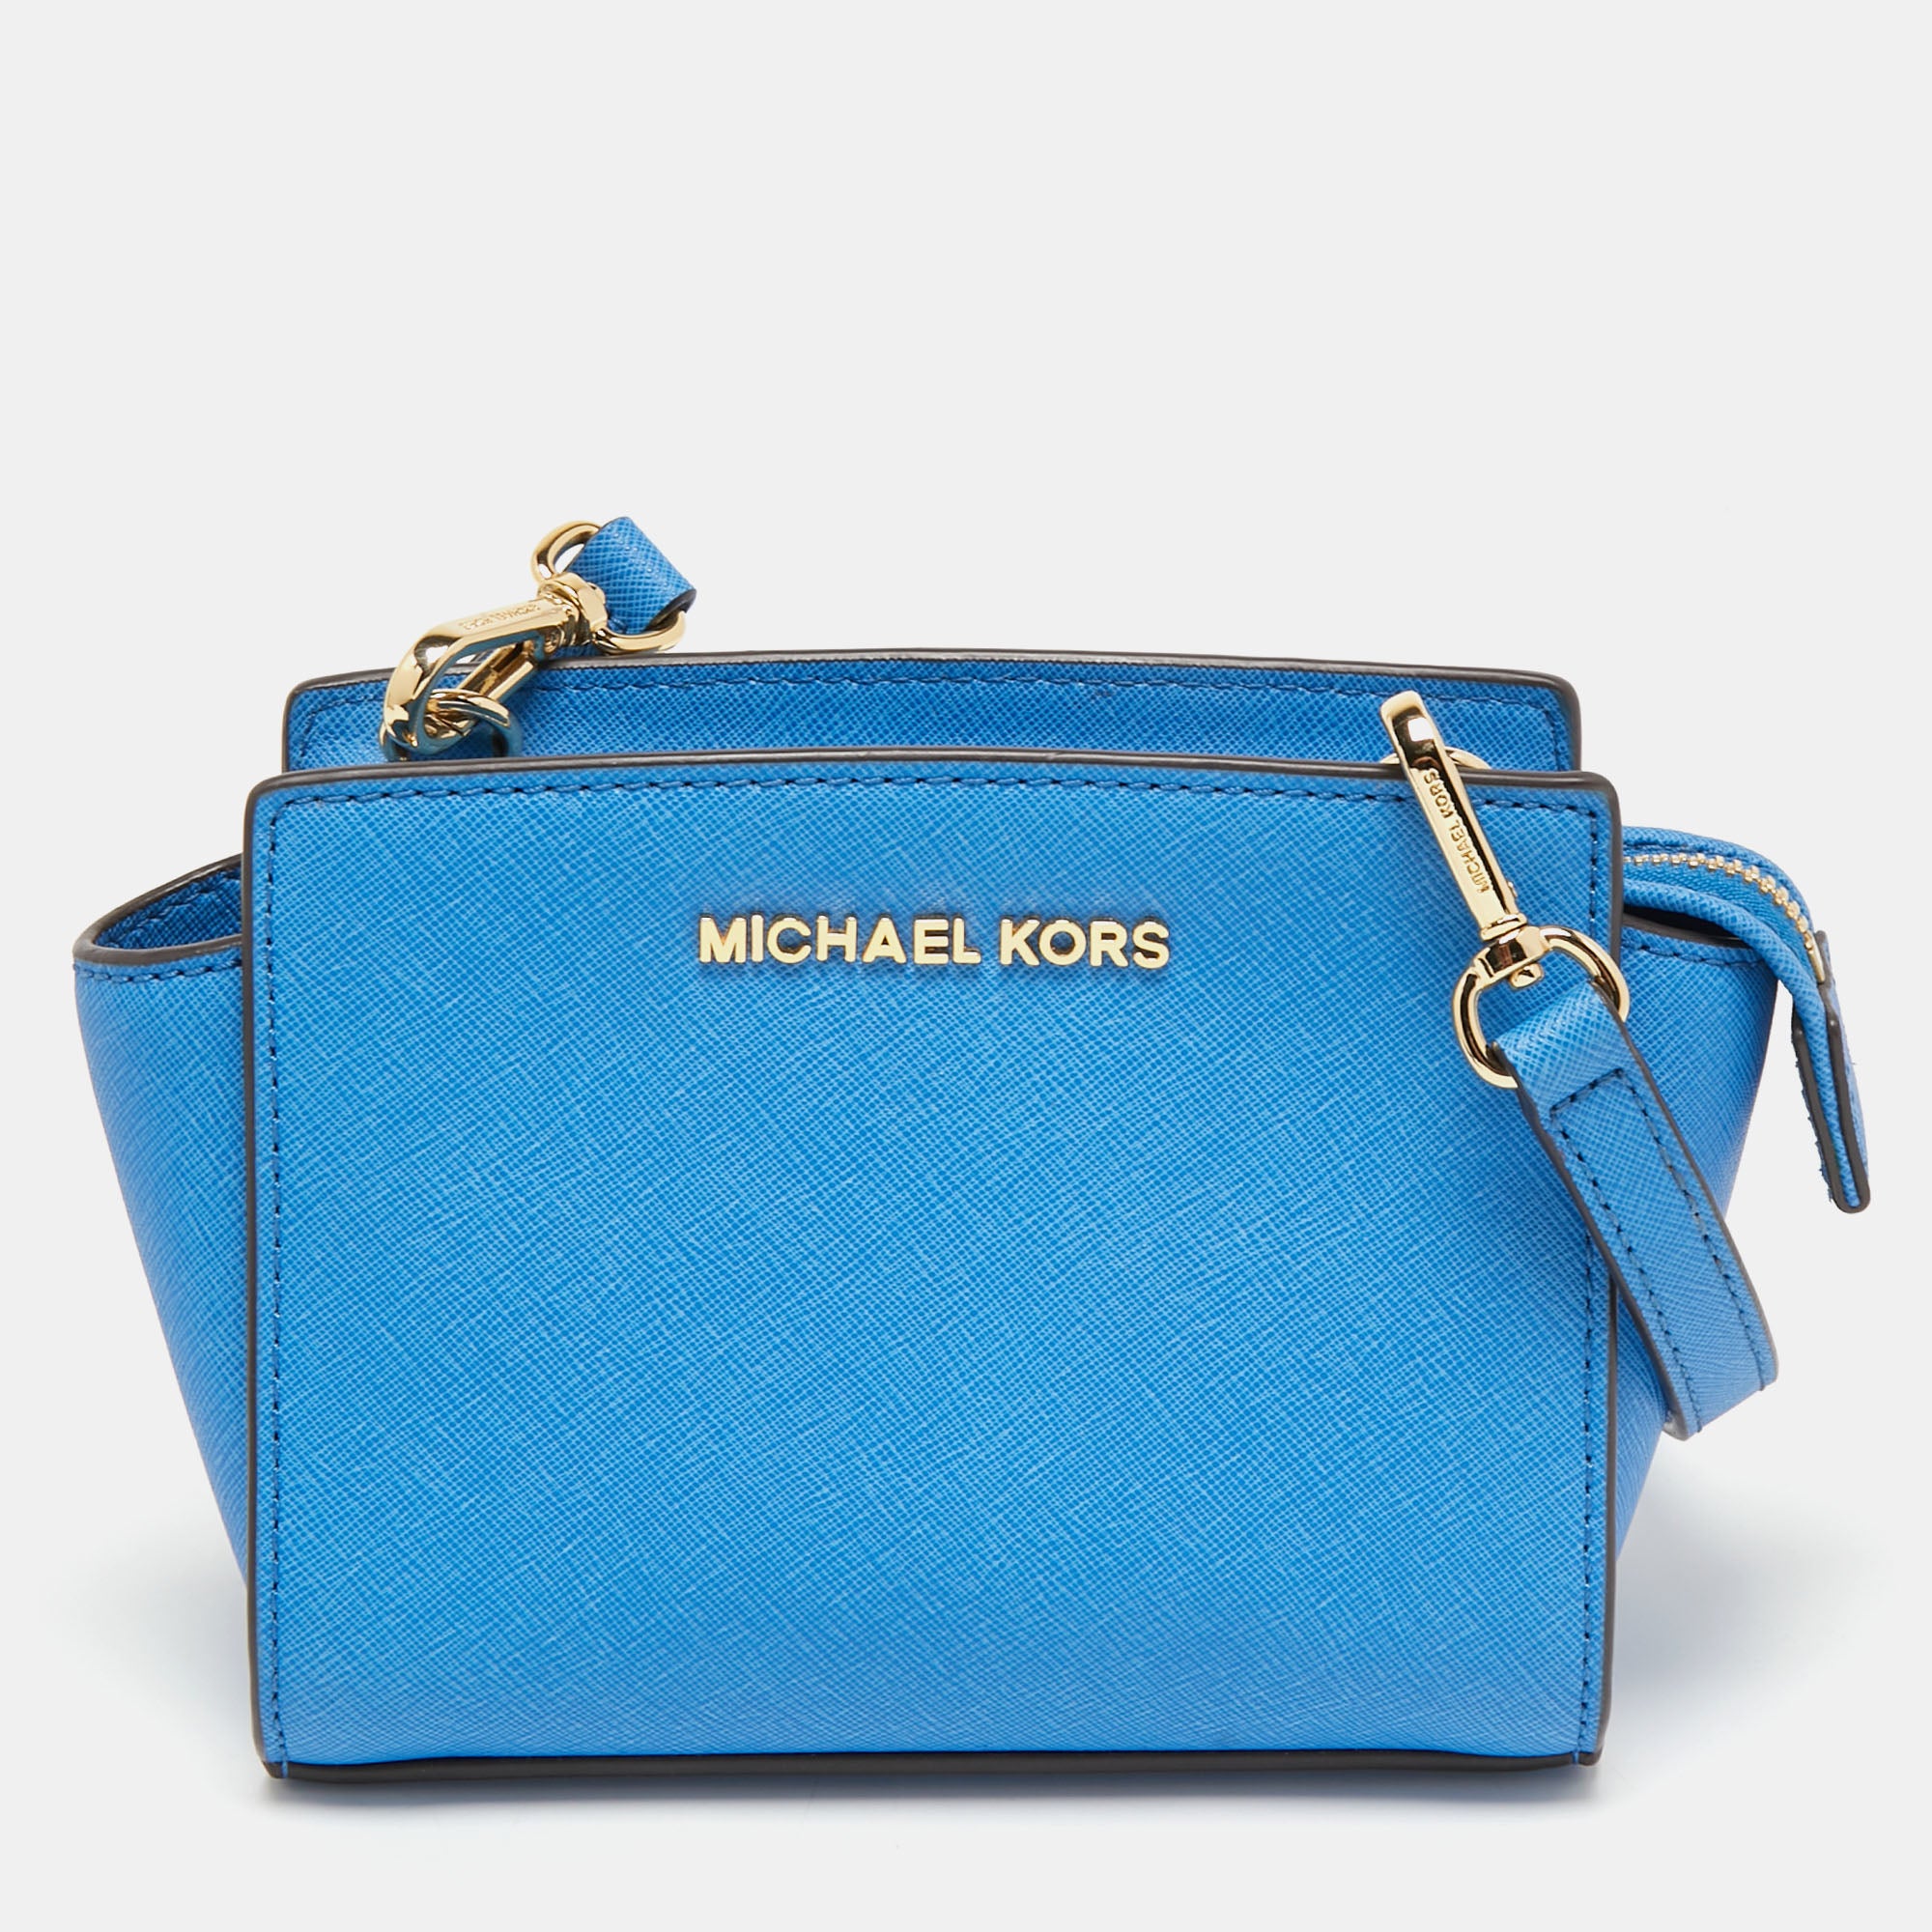 Michael Kors Jet Set Travel Small Top Zip Coin Pouch with ID Holder in  Saffiano Leather : Amazon.co.uk: Fashion